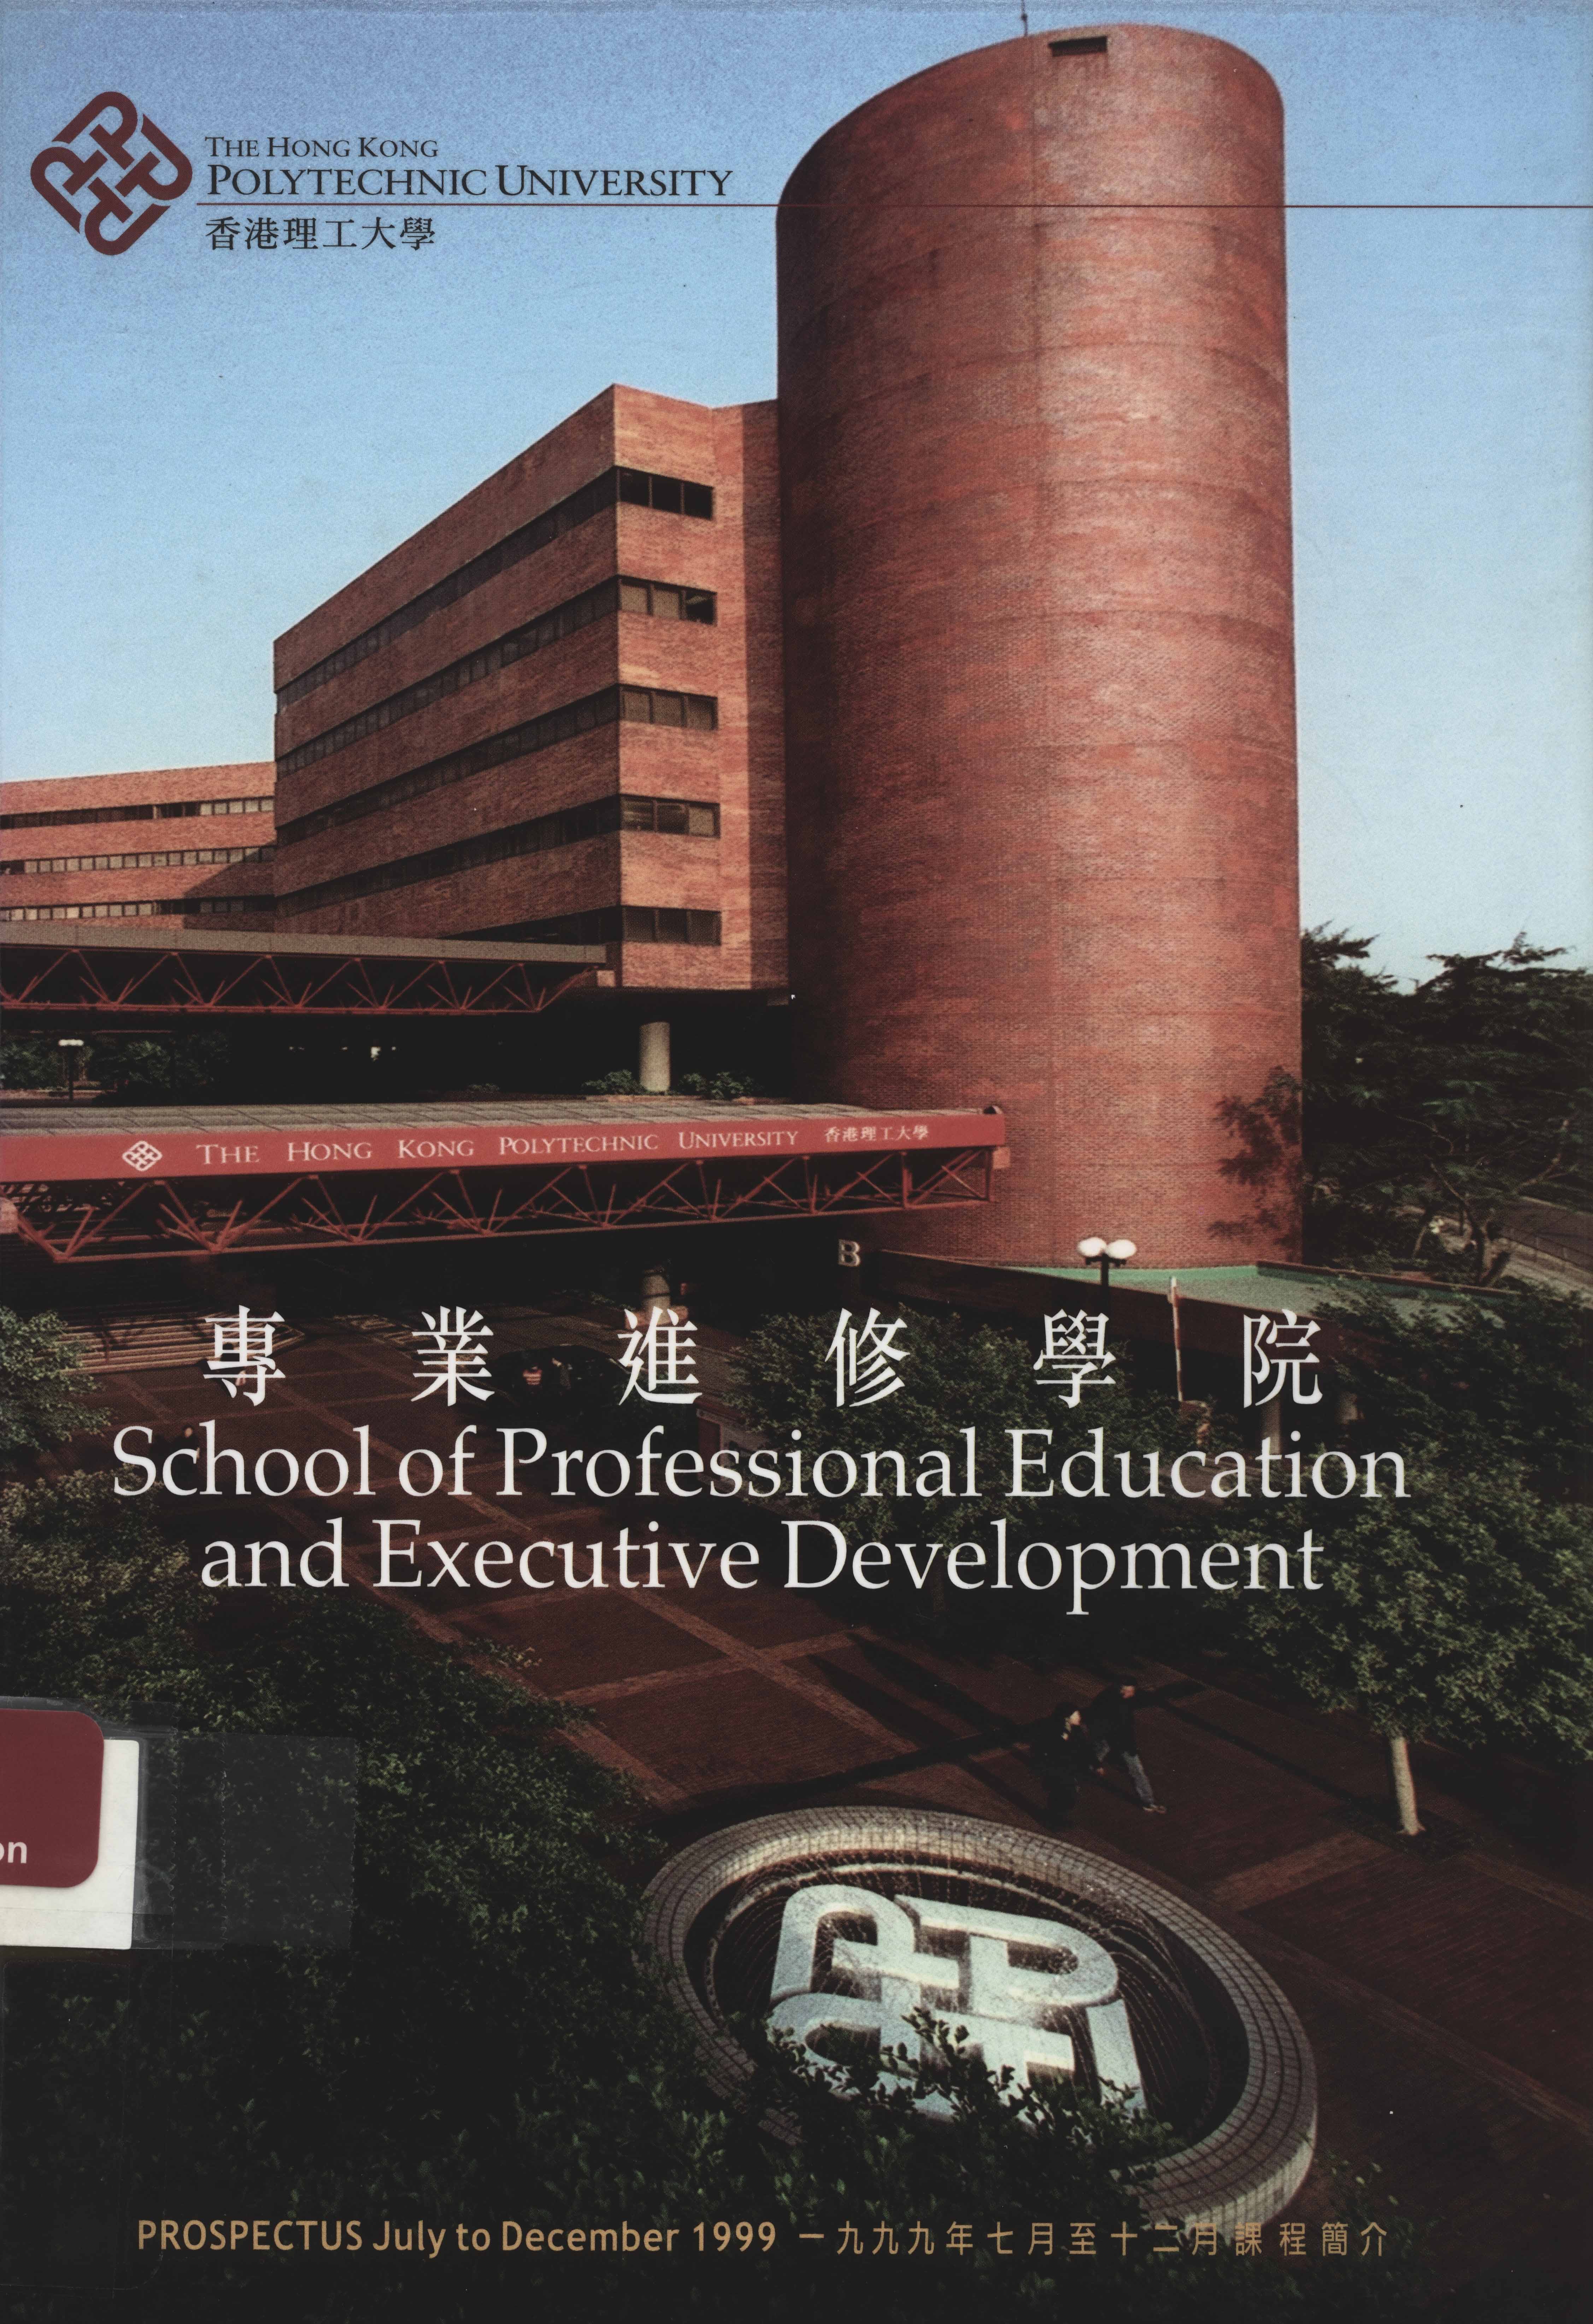 Prospectus [School of Professional Education and Executive Development (SPEED) - July to December 1999]